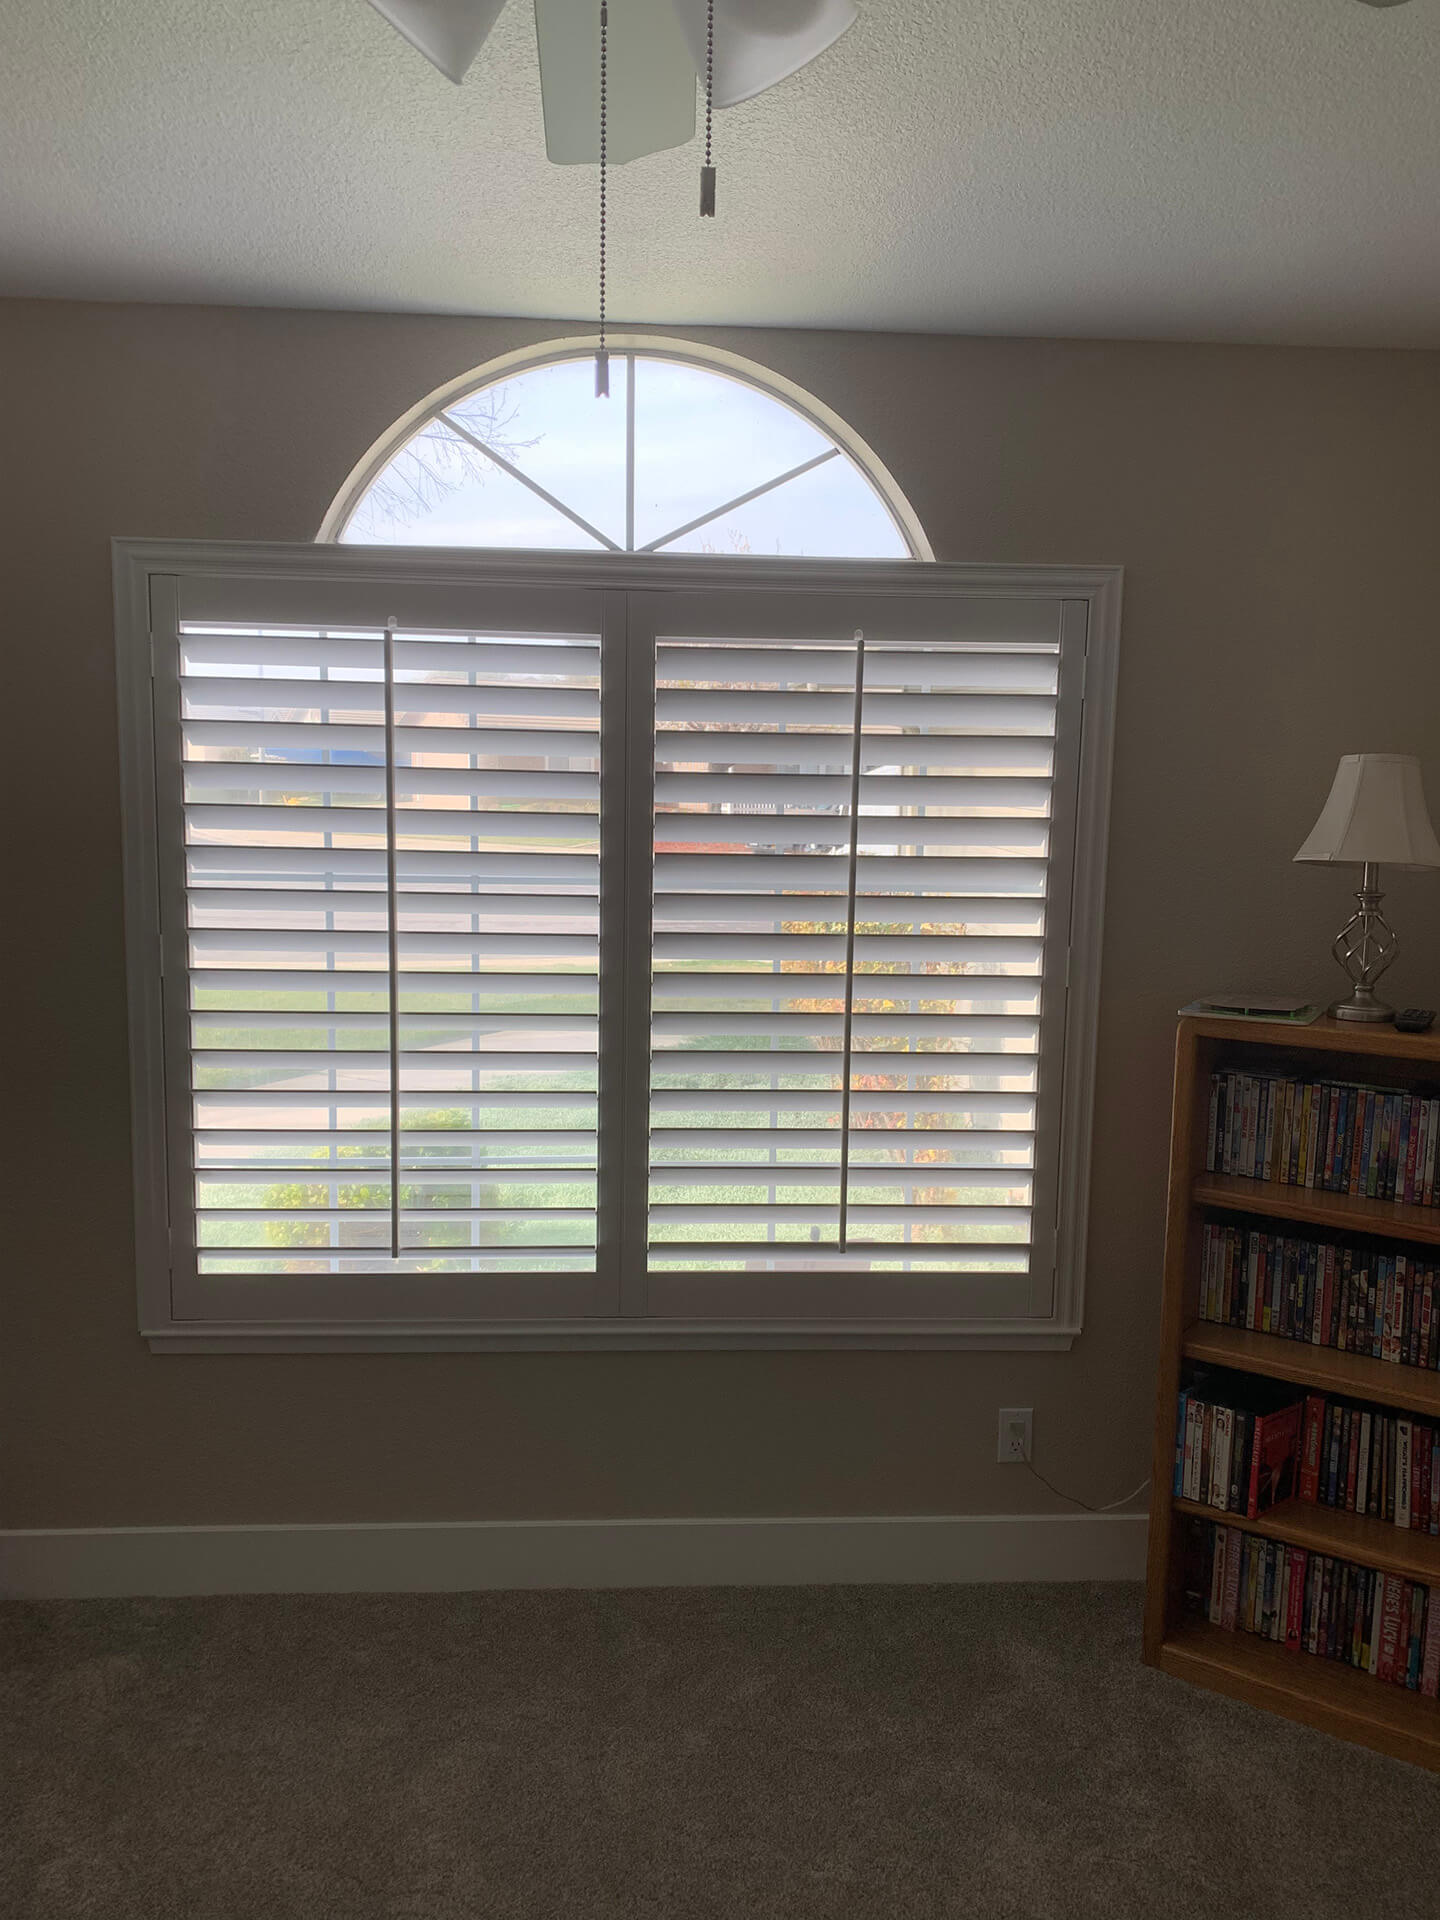 A home library with shutters covering the single window.